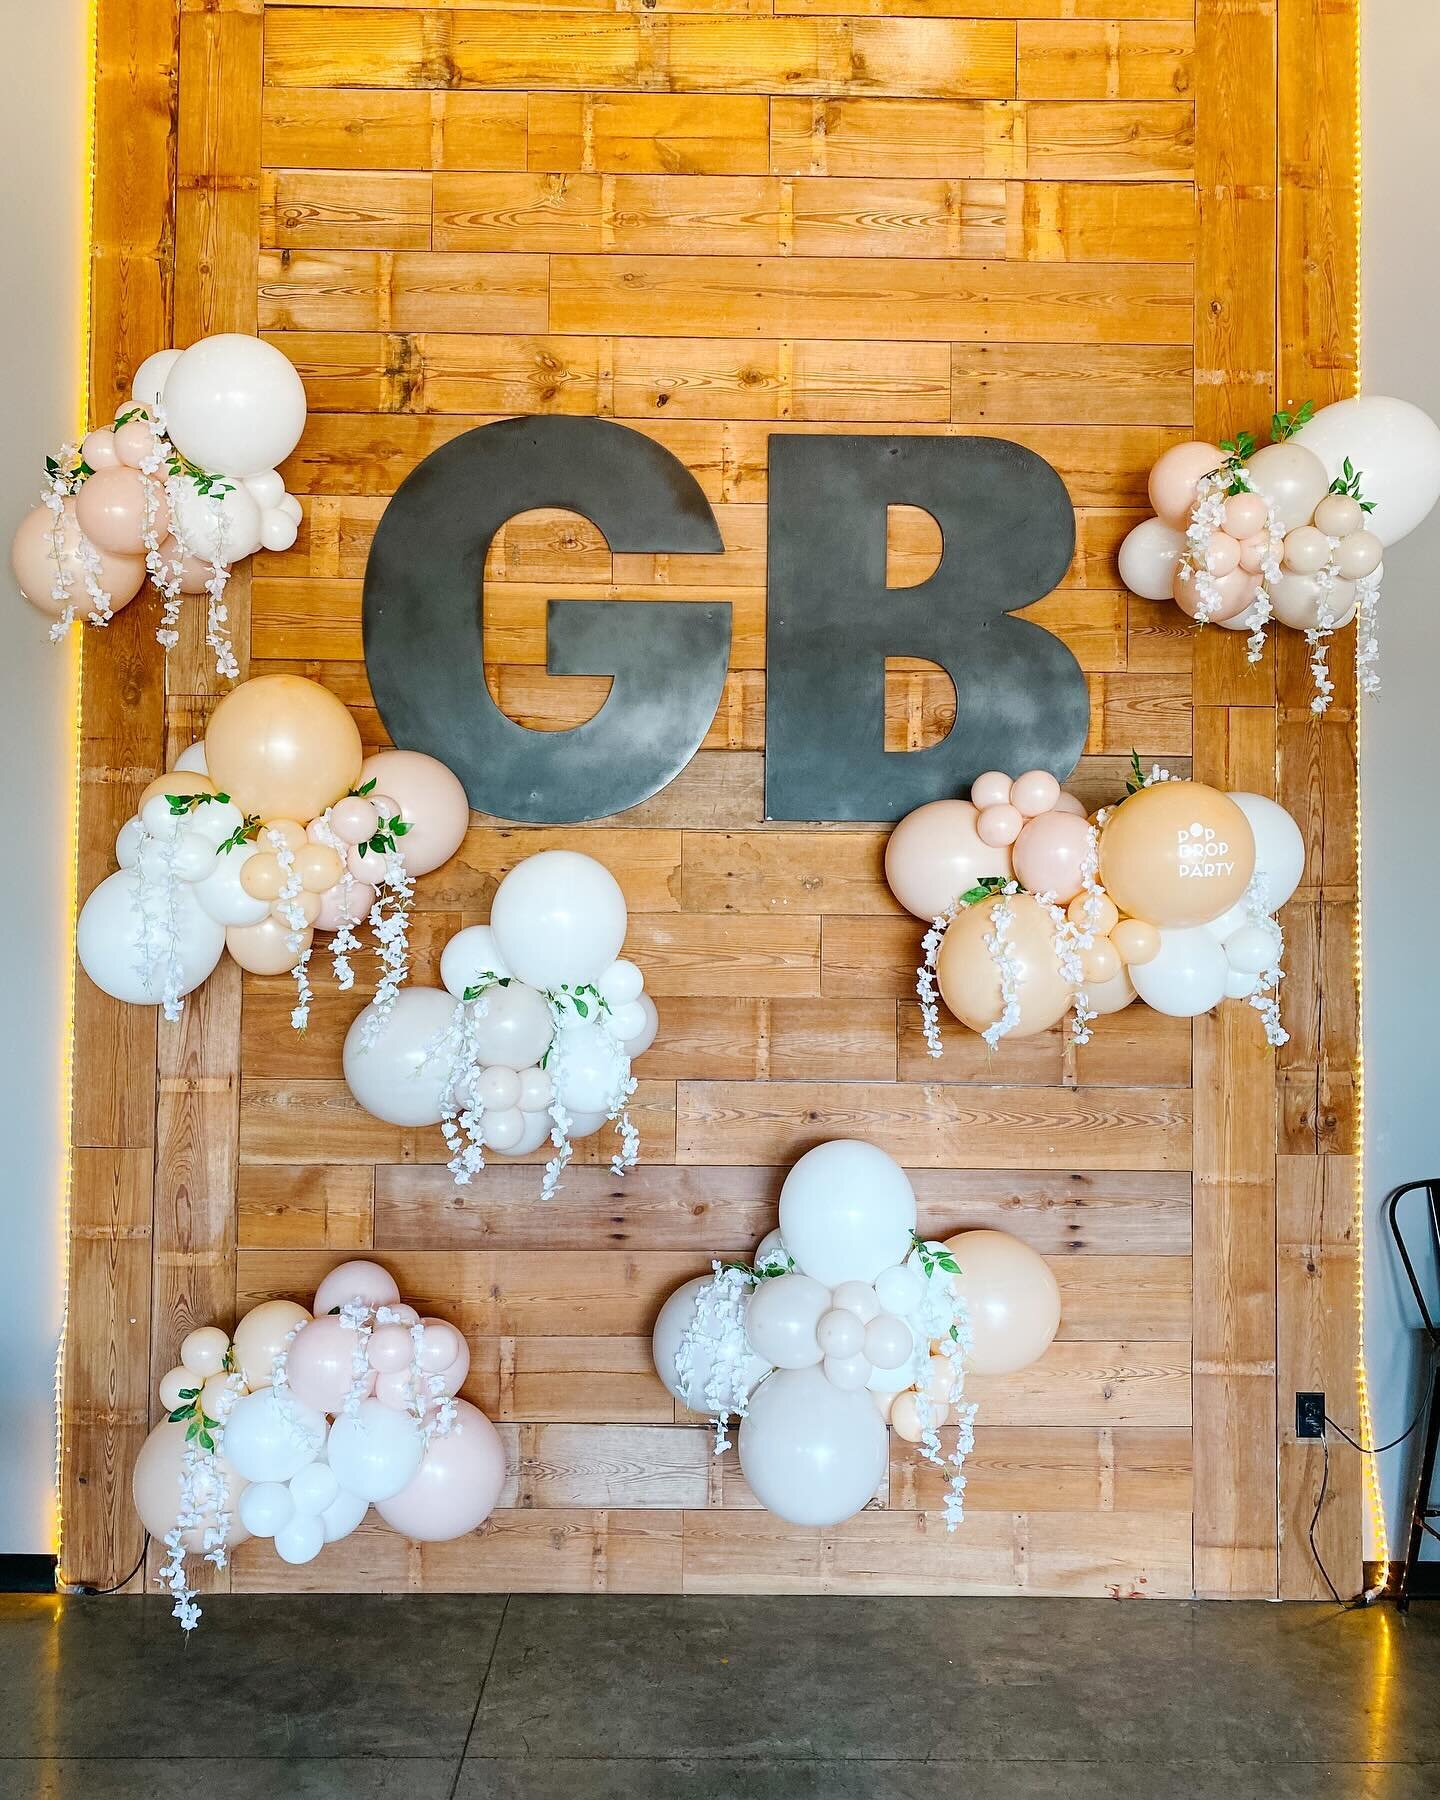 👰🏽&zwj;♀️Bridal Show👰🏼
@globalbrew held their Bridal Show in their Barrel Room yesterday and brought in some awesome local vendors for brides to shop around in one, beautiful space! We loved transforming the GB wood wall to a great option for pho